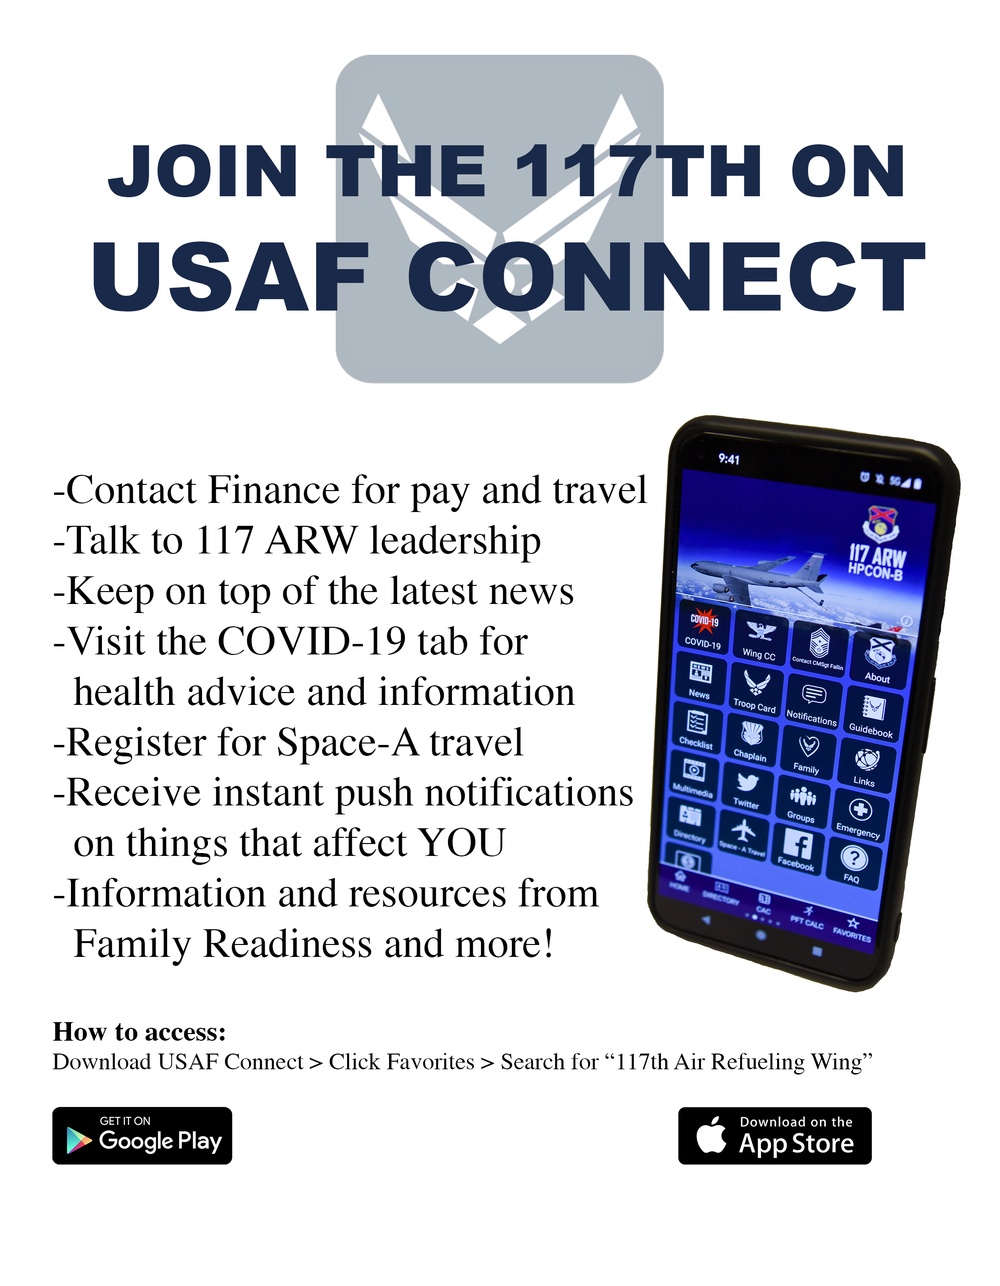 Join the 117th on USAF Connect